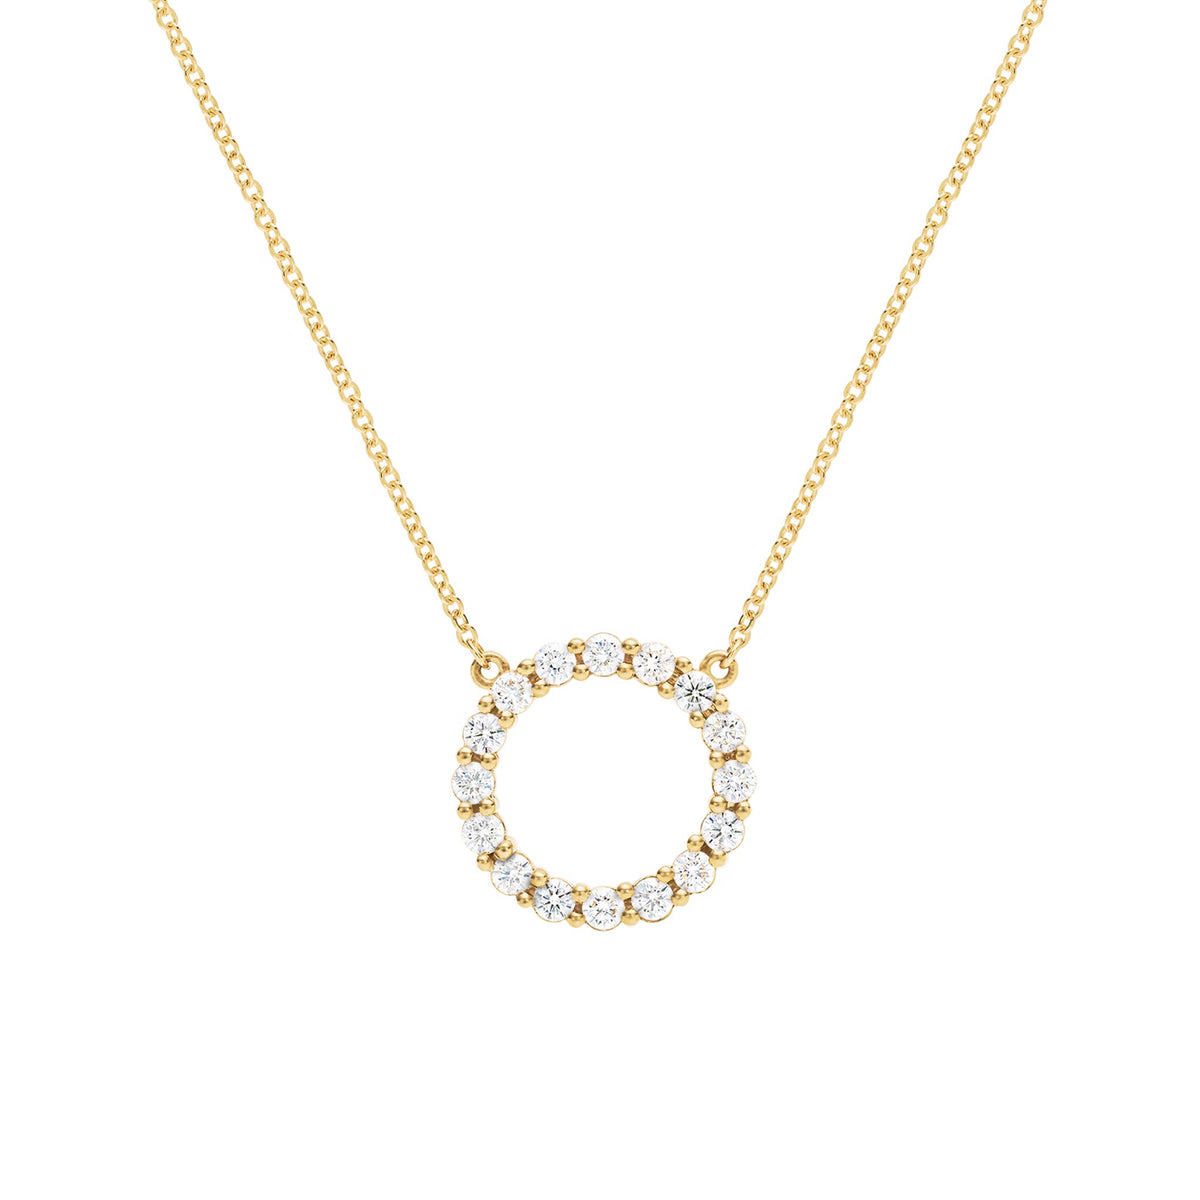 14kt yellow gold necklace with diamonds